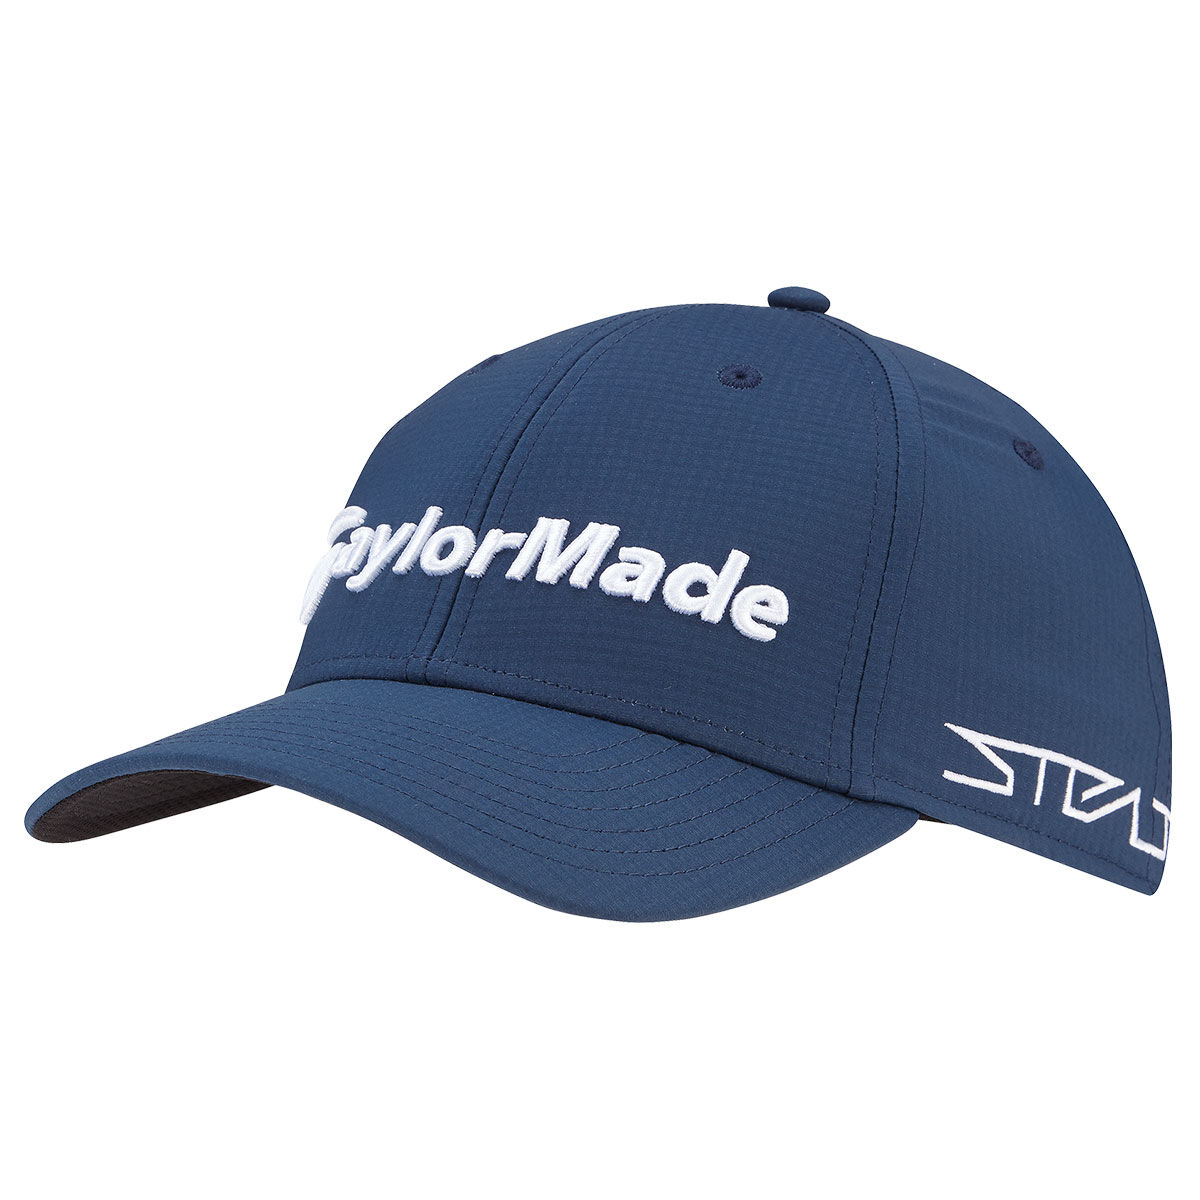 TaylorMade Men’s Navy Blue and White Comfortable Embroidered Tour Radar Golf Cap | American Golf, One Size